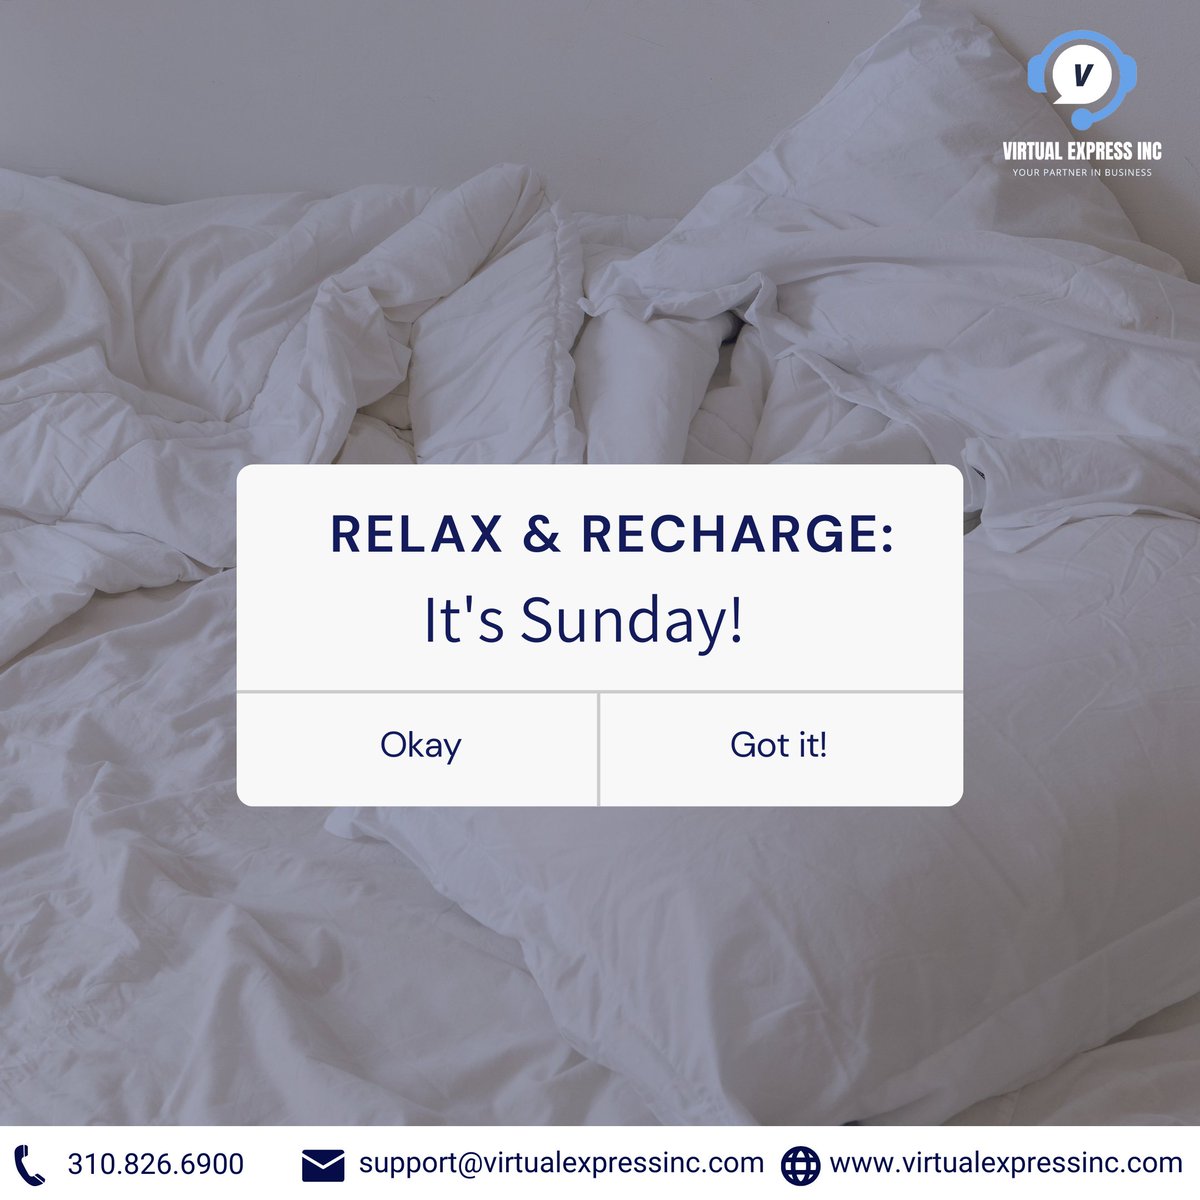 Give yourself the gift of relaxation today.

Whether it's a cozy read, a nature walk, or simply soaking up some sun, make time to unwind and prepare for the week ahead. 🌿

#SelfCareSunday #SundayChill #RefreshAndRecharge
#Virtualexpressinc